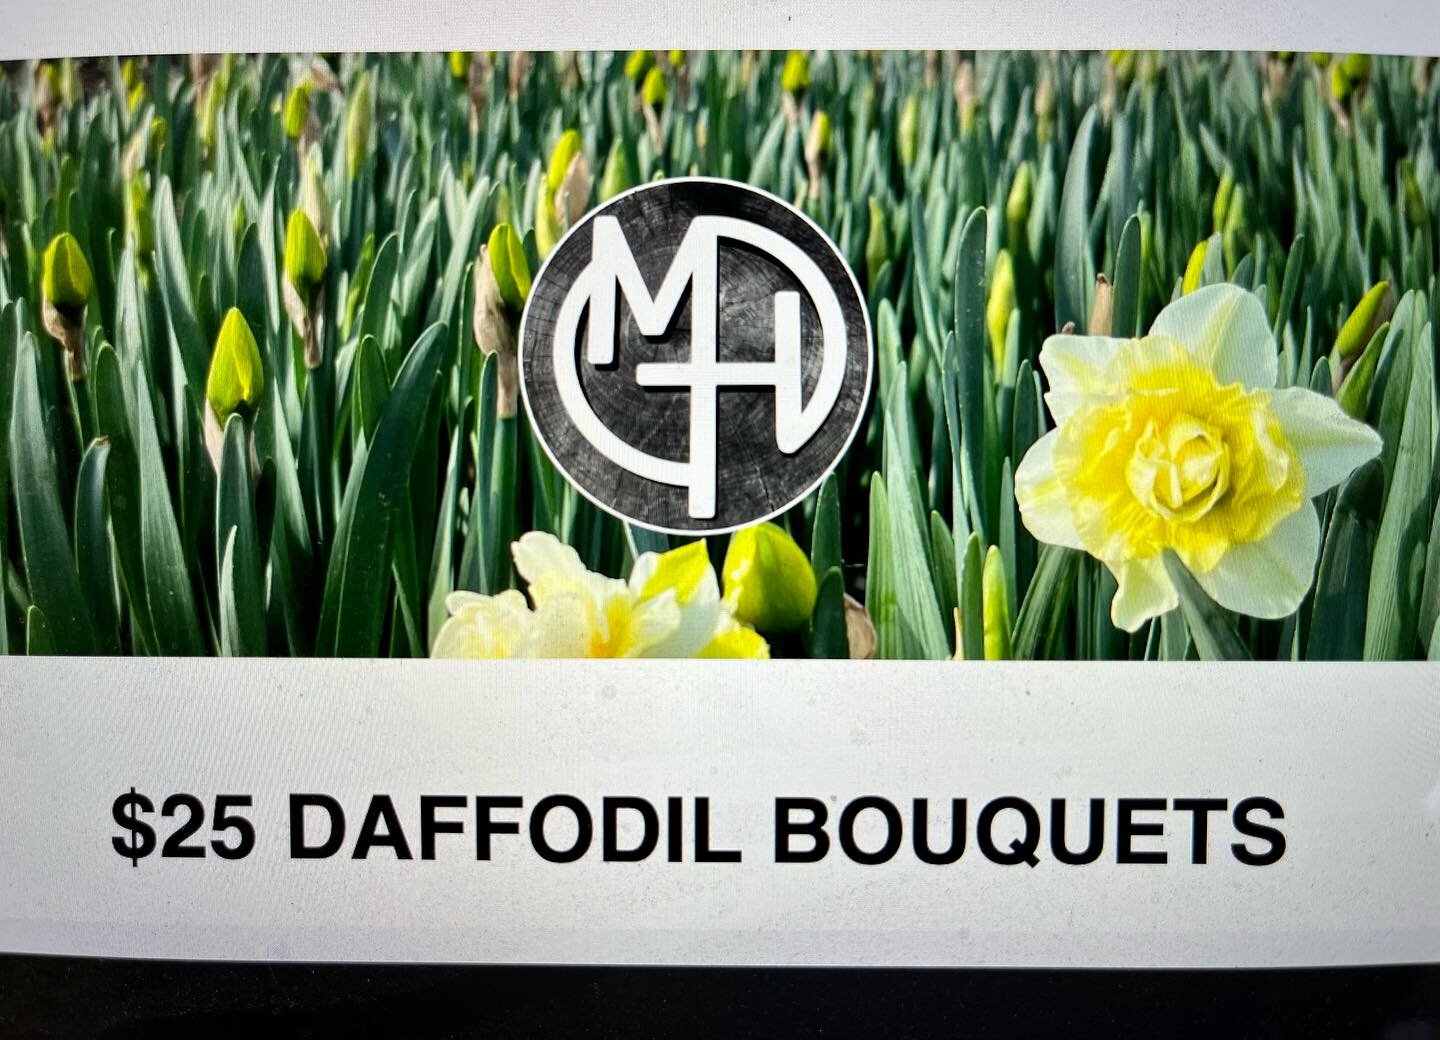 OUR DAFFODILS ARE BLOOMING!  We are pre-selling bouquets on our website with a pickup location at Central Commons in Dallas.
www.marshillfarm.com/shop-the-farm